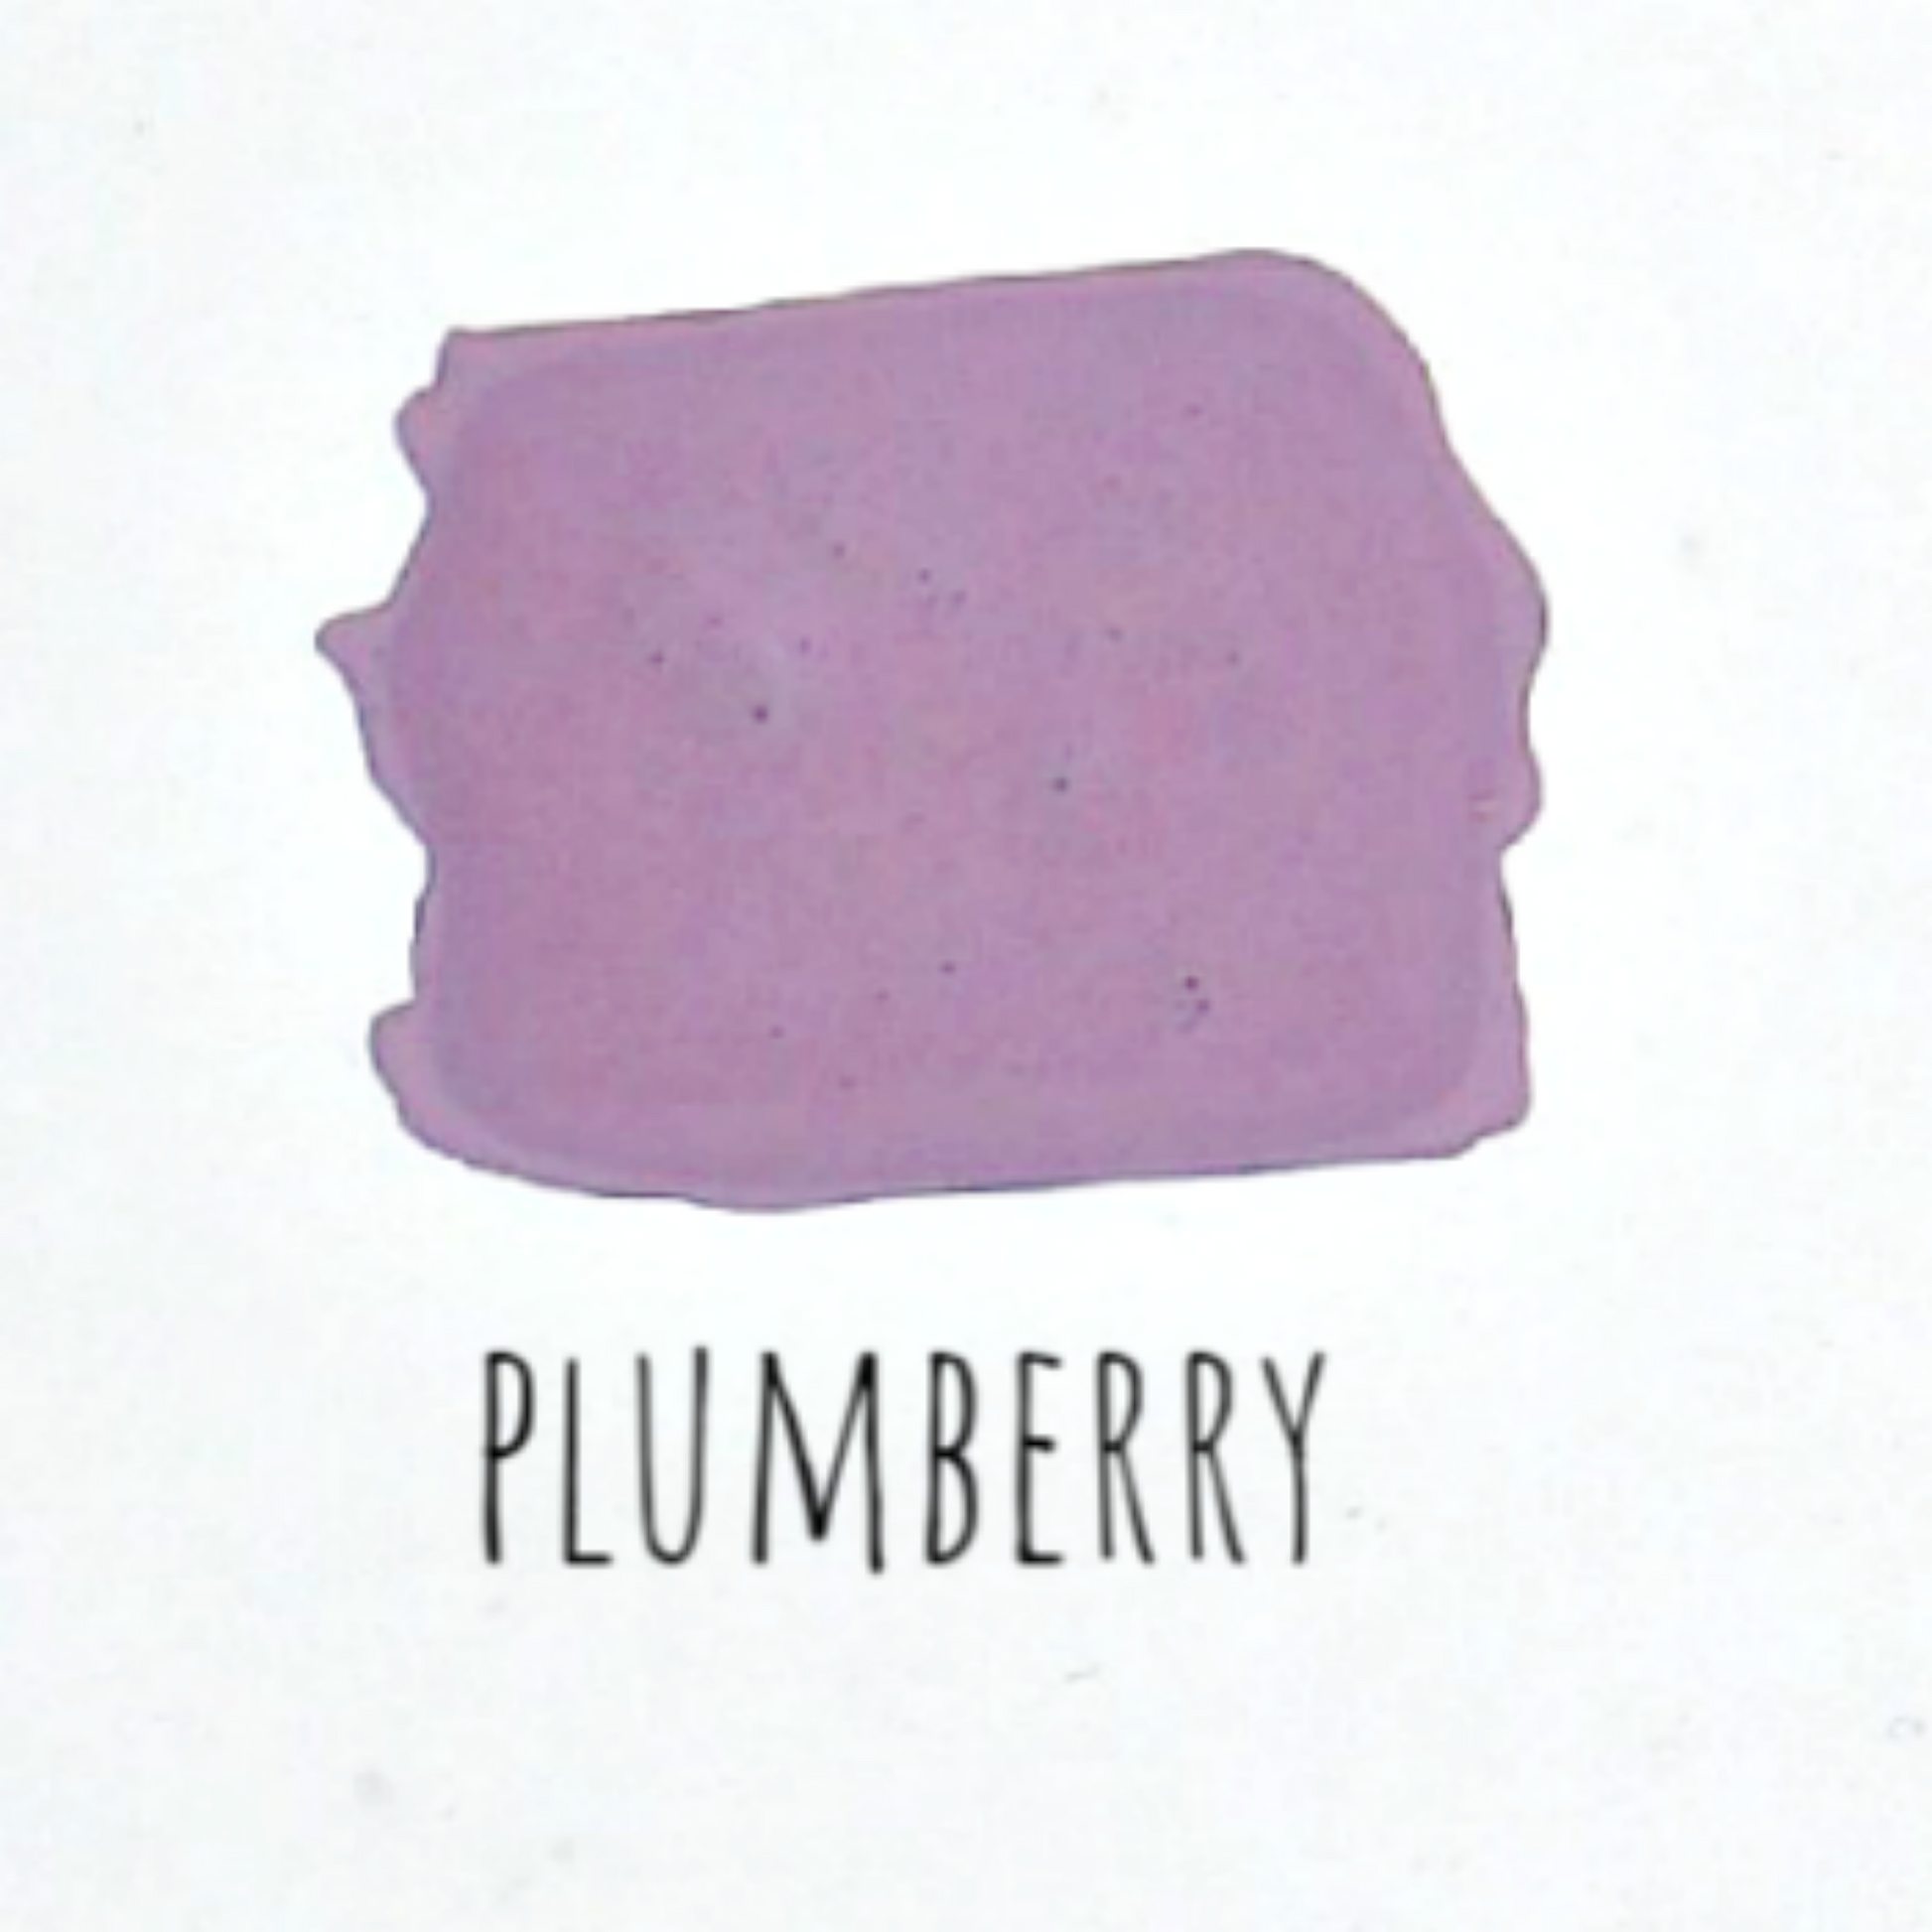 Sample paint swatch of Plumberry by Sweet Pickins Milk Paint available at Milton's Daughter